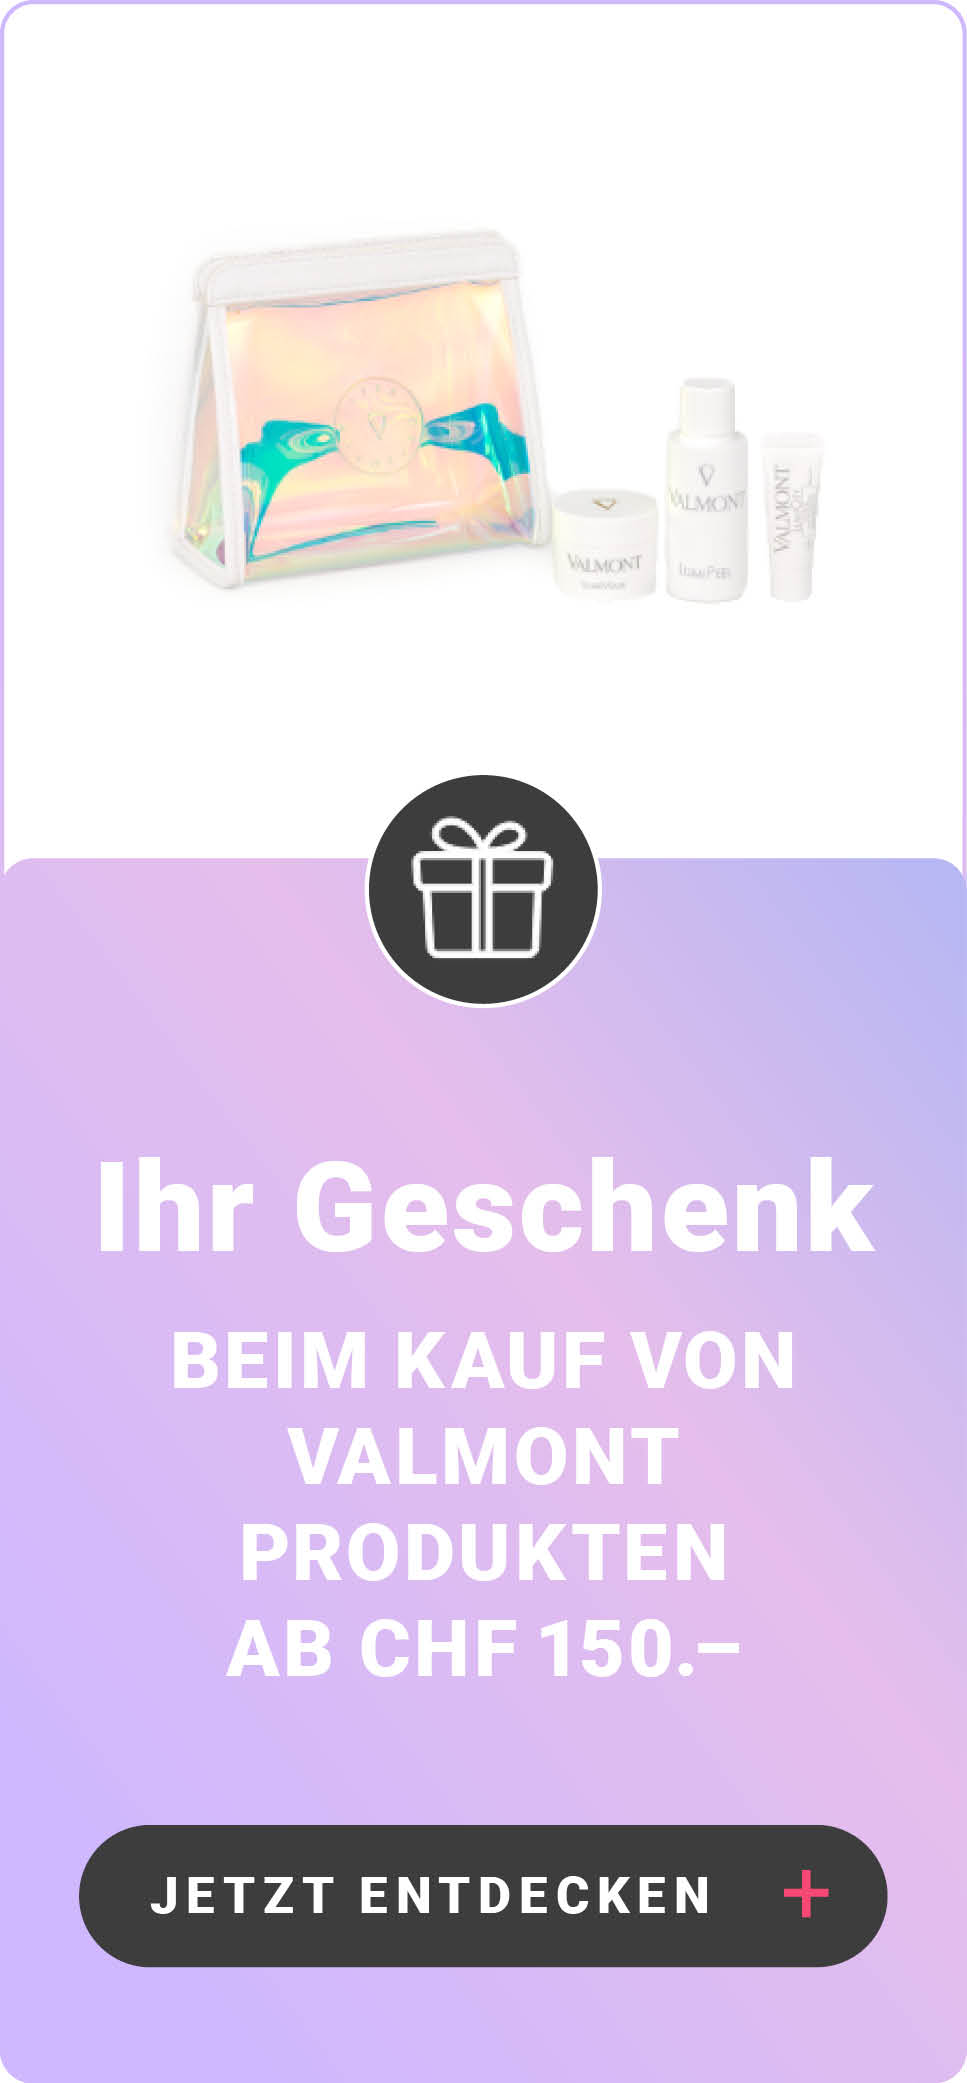 Valmont Promotion